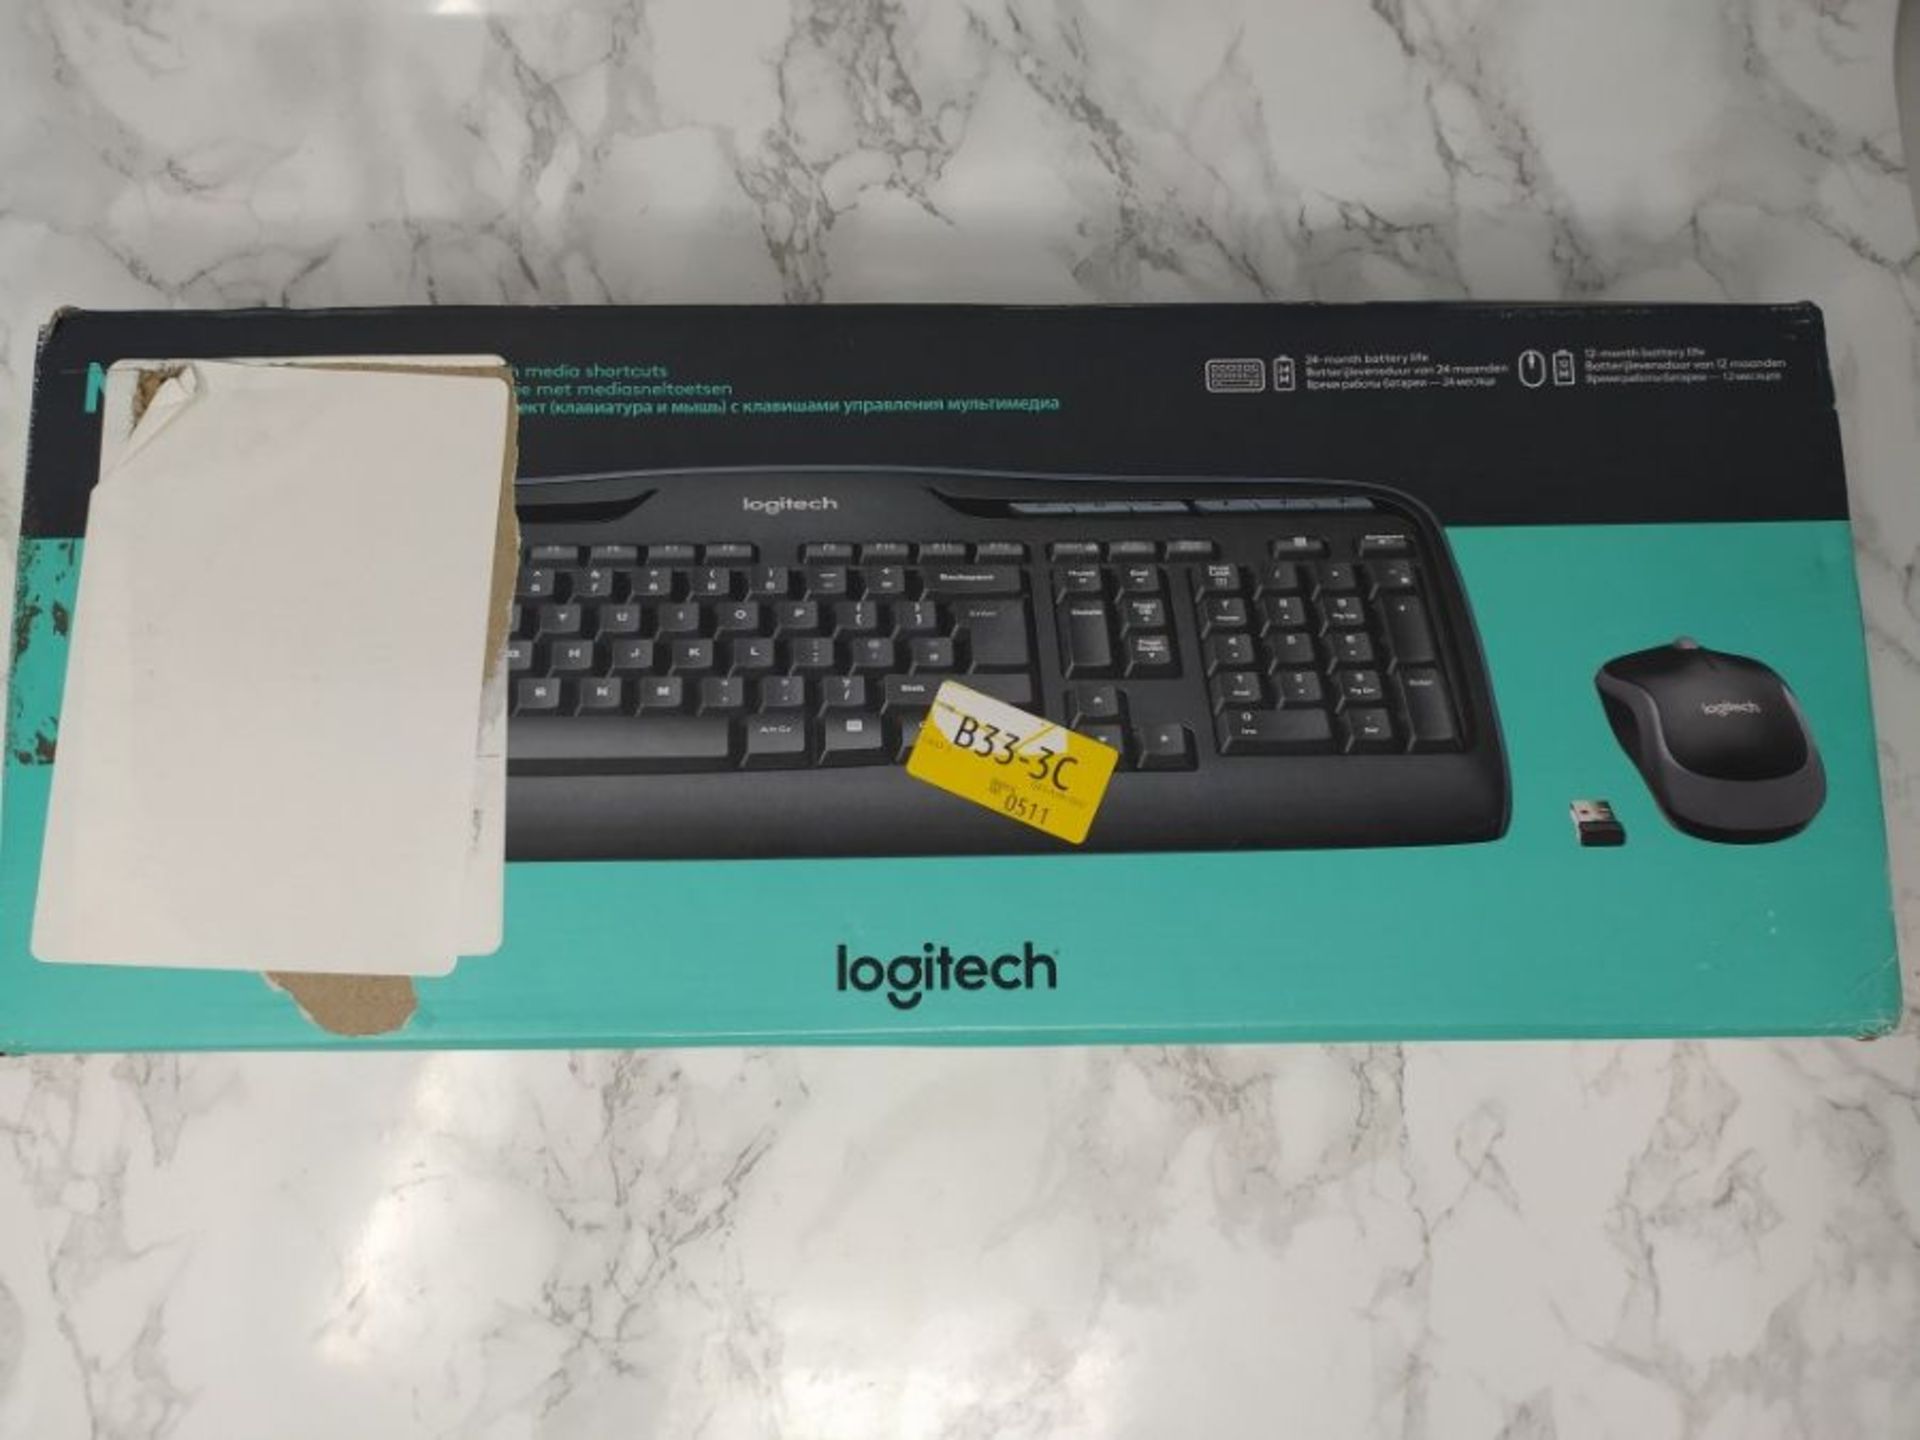 Logitech MK330 Wireless Keyboard and Mouse Combo for Windows, 2.4 GHz Wireless with US - Image 2 of 3